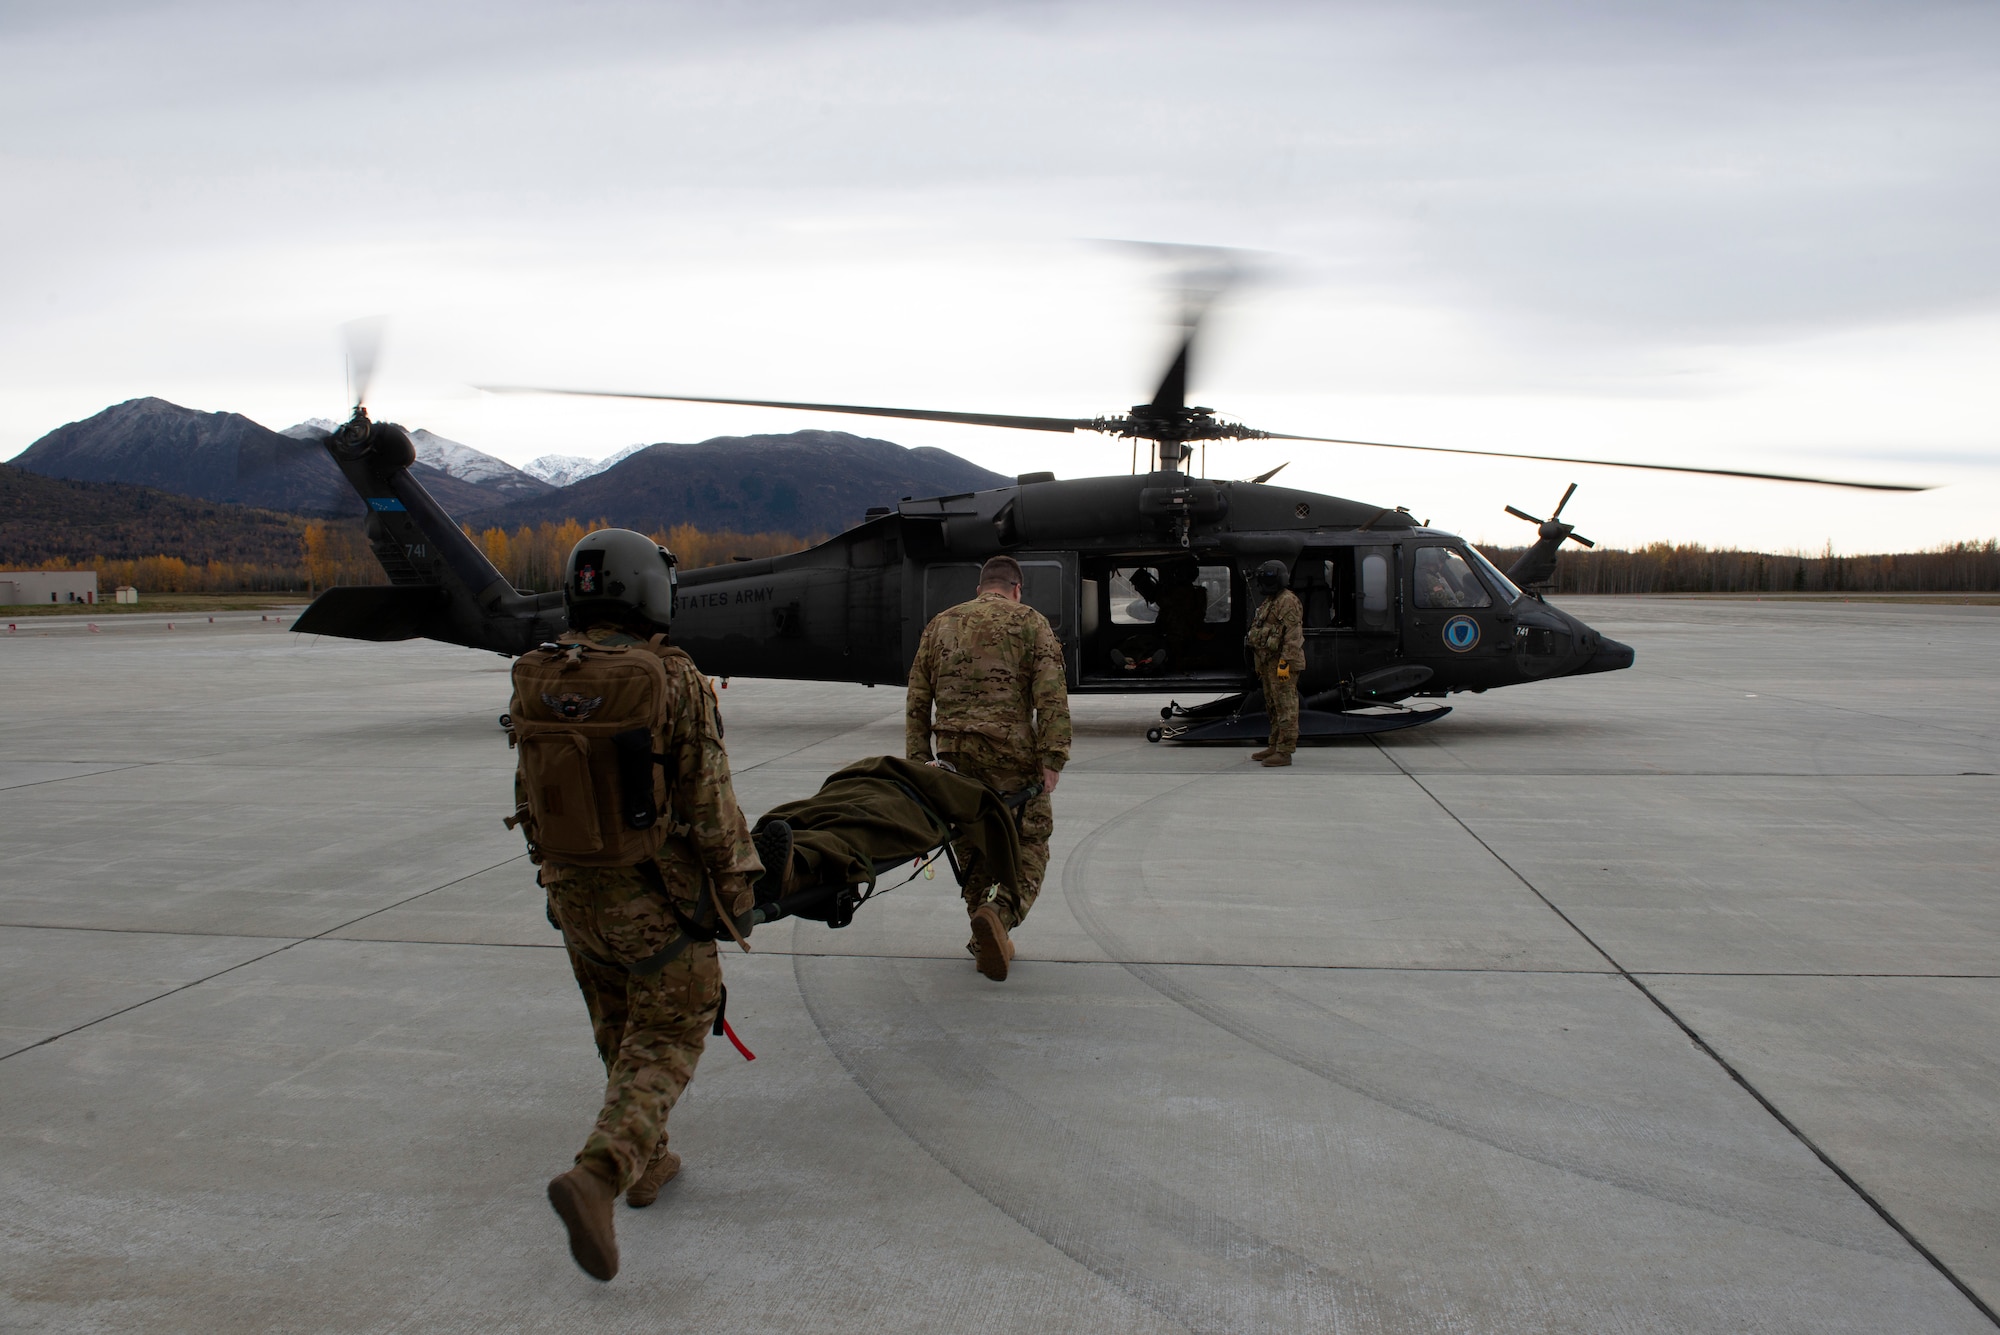 U.S. Army Staff Sgt. Mikana Halloran, flight medic, and U.S. Army Maj. Titus Rund, flight surgeon, both with the 2-104th G. Company, 2nd Battalion, 2nd Detachment, Air Ambulance, Alaska Army National Guard, load an Airman with a simulated injury into an AKARNG UH-60L Black Hawk for a medical evacuation during Polar Force 20-1 at Joint Base Elmendorf-Richardson, Alaska, Oct. 8, 2019. Designed to test JBER’s mission readiness, Polar Force 20-1 is a two-week exercise that hones Airmen’s skills and experience when facing adverse situations. Airmen refined their contingency tactics, techniques and procedures in support of the Pacific Air Force’s Agile Combat Employment concept of operations. Agile Combat Support excellence yields multi-domain operations success.